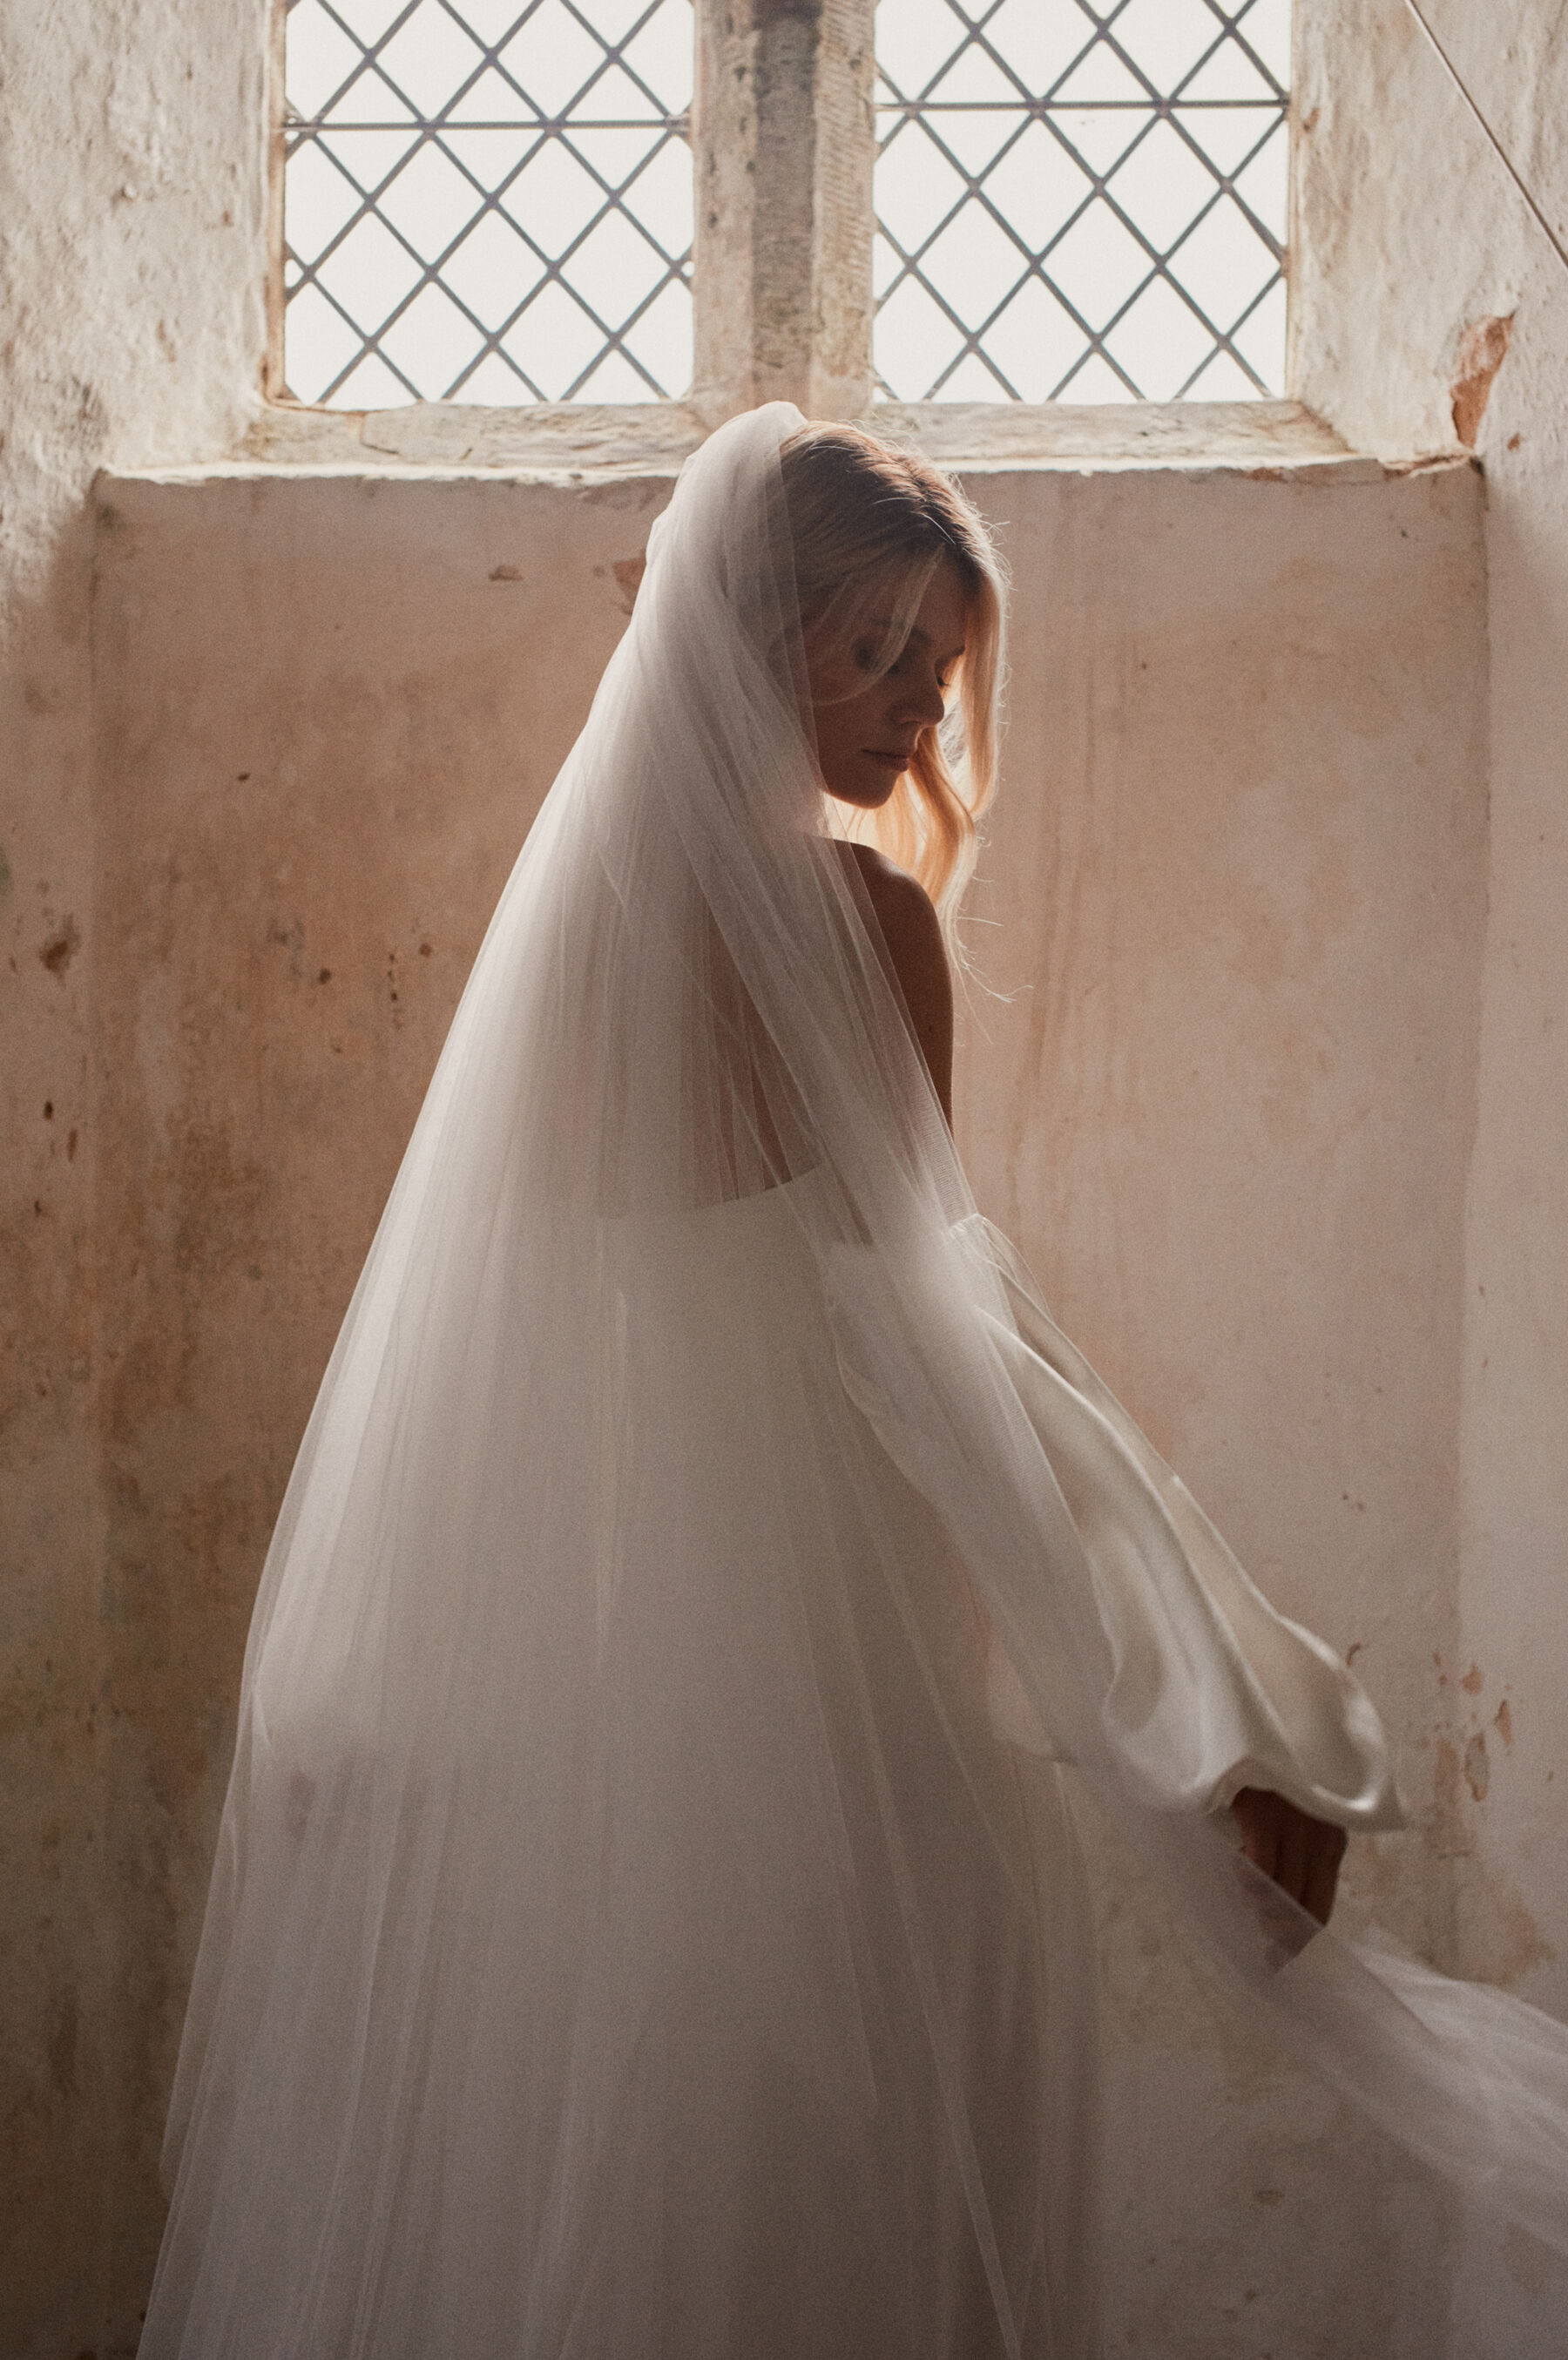 Luna Bea Bride - modern ethical and sustainable wedding dress and veil